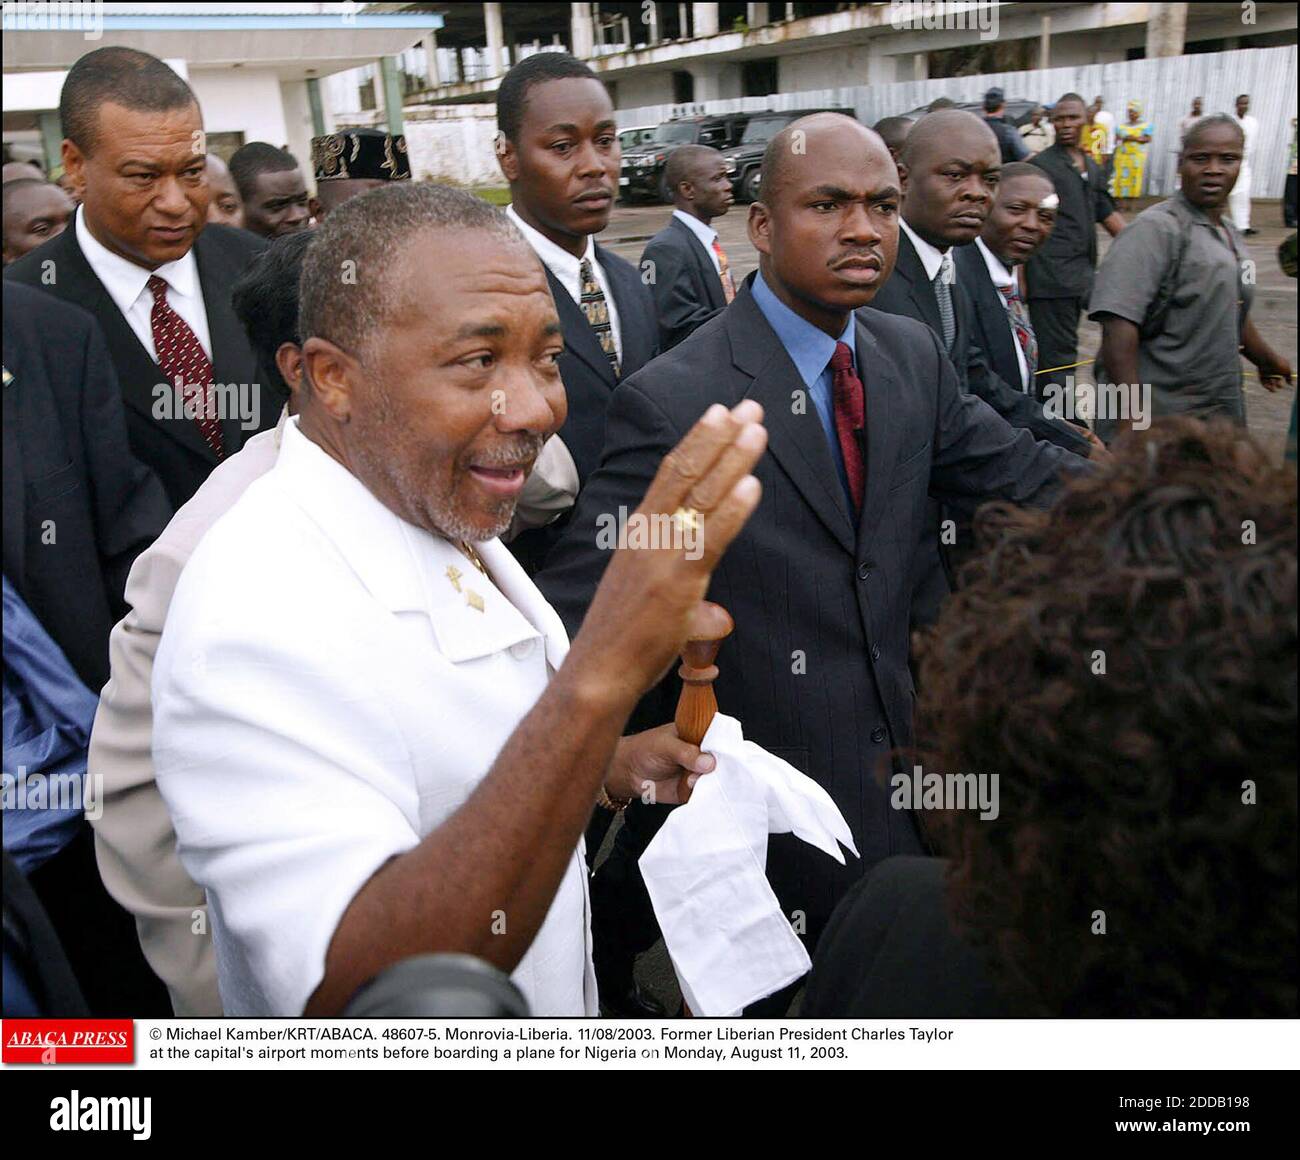 NO FILM, NO VIDEO, NO TV, NO DOCUMENTARY - © Michael Kamber/KRT/ABACA. 48607-5. Monrovia-Liberia. 11/08/2003. Former Liberian President Charles Taylor at the capital's airport moments before boarding a plane for Nigeria on Monday, August 11, 2003. Stock Photo